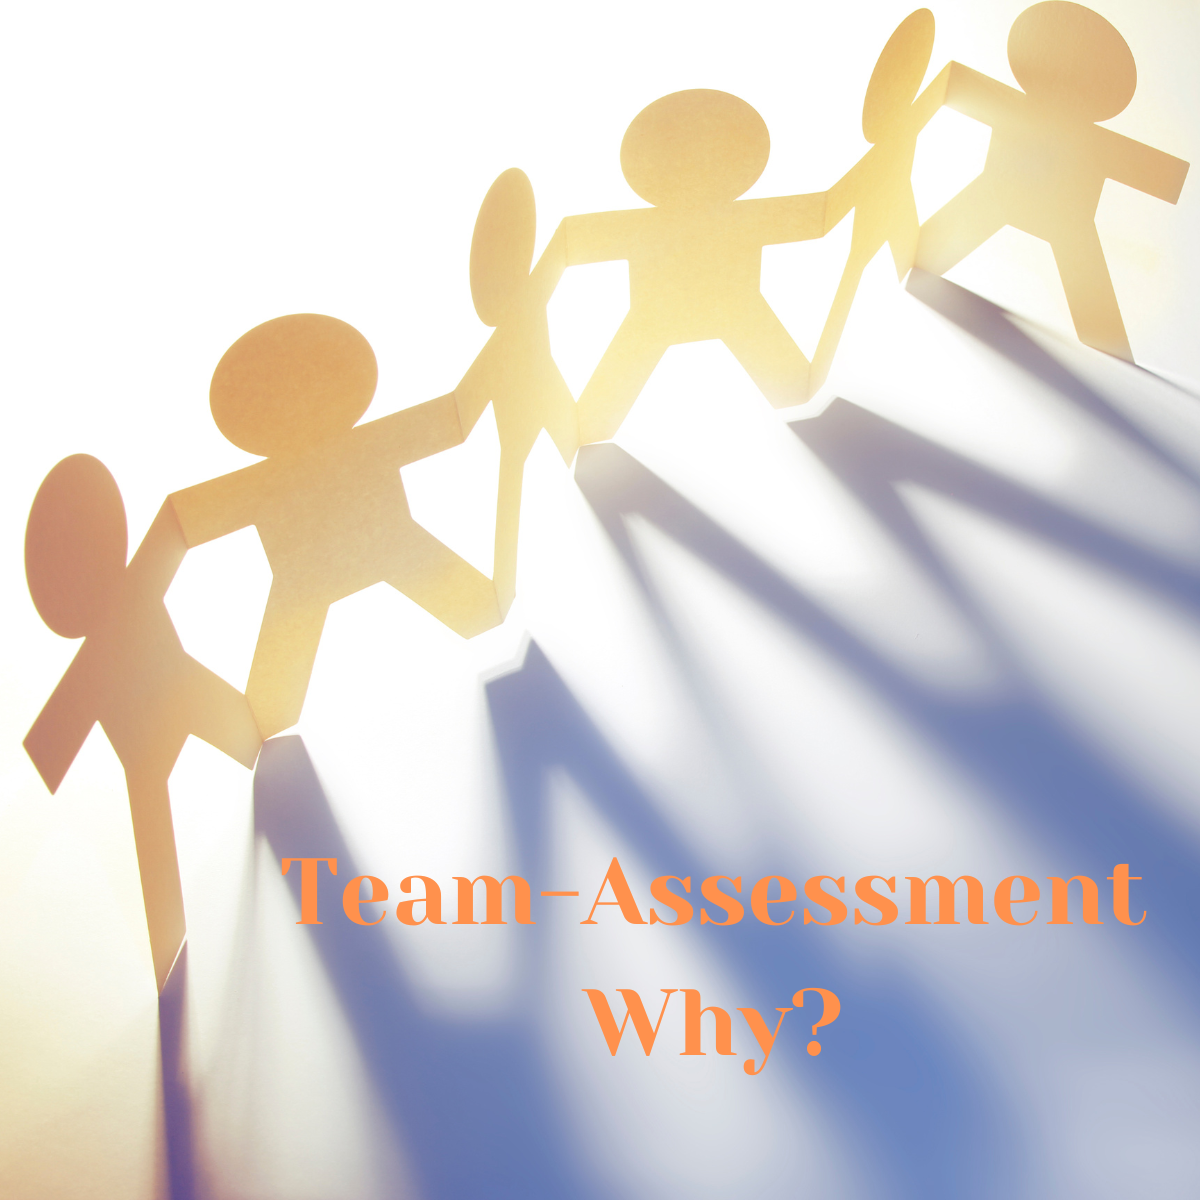 Team development with personality assessments, an article by Metakomm